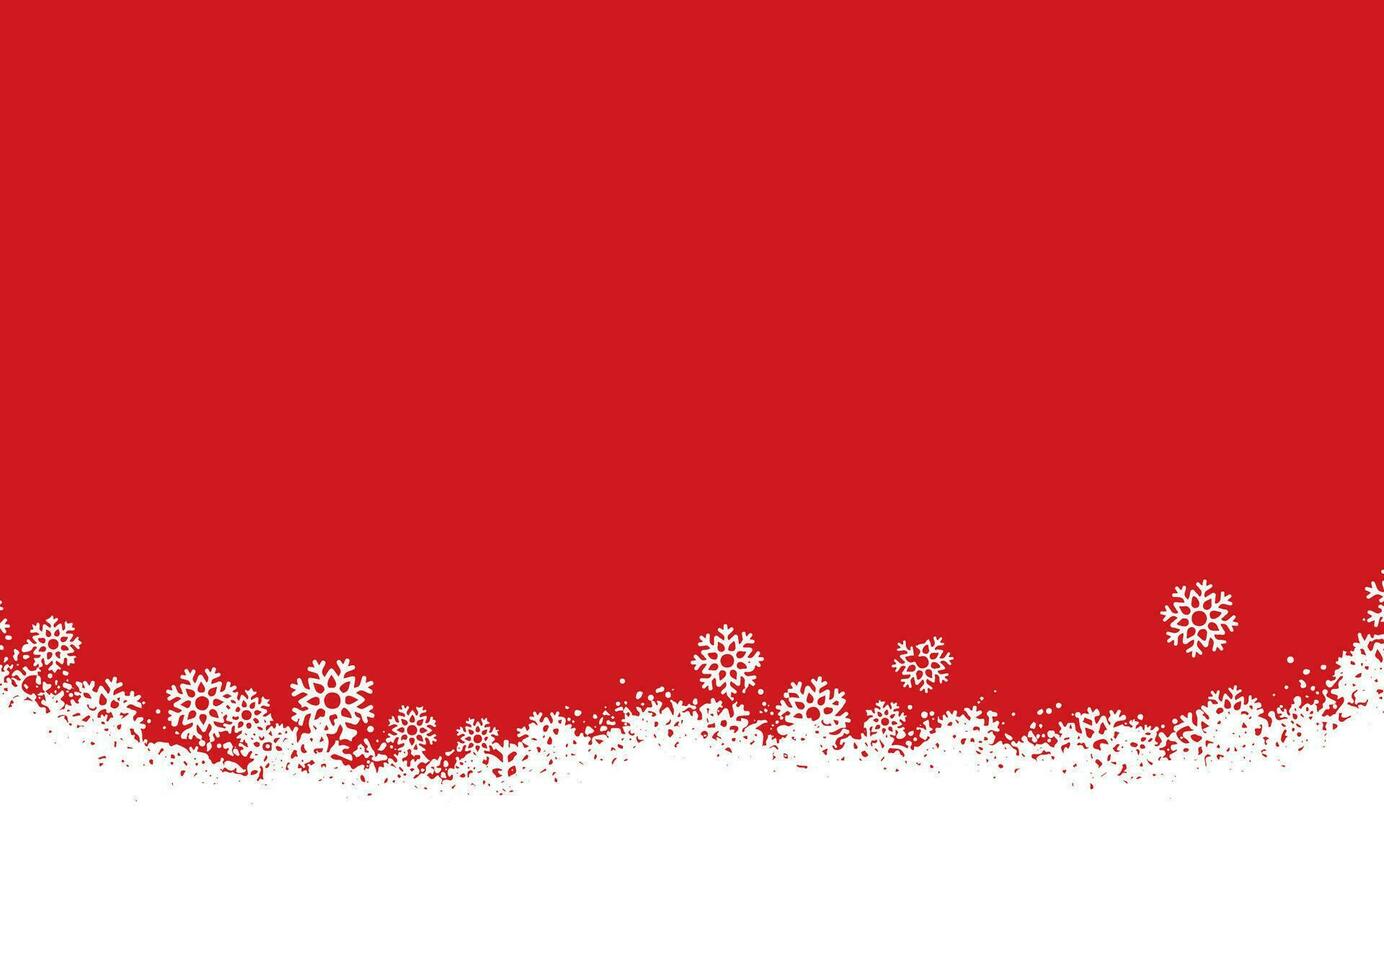 Christmas background with snowflakes on red vector